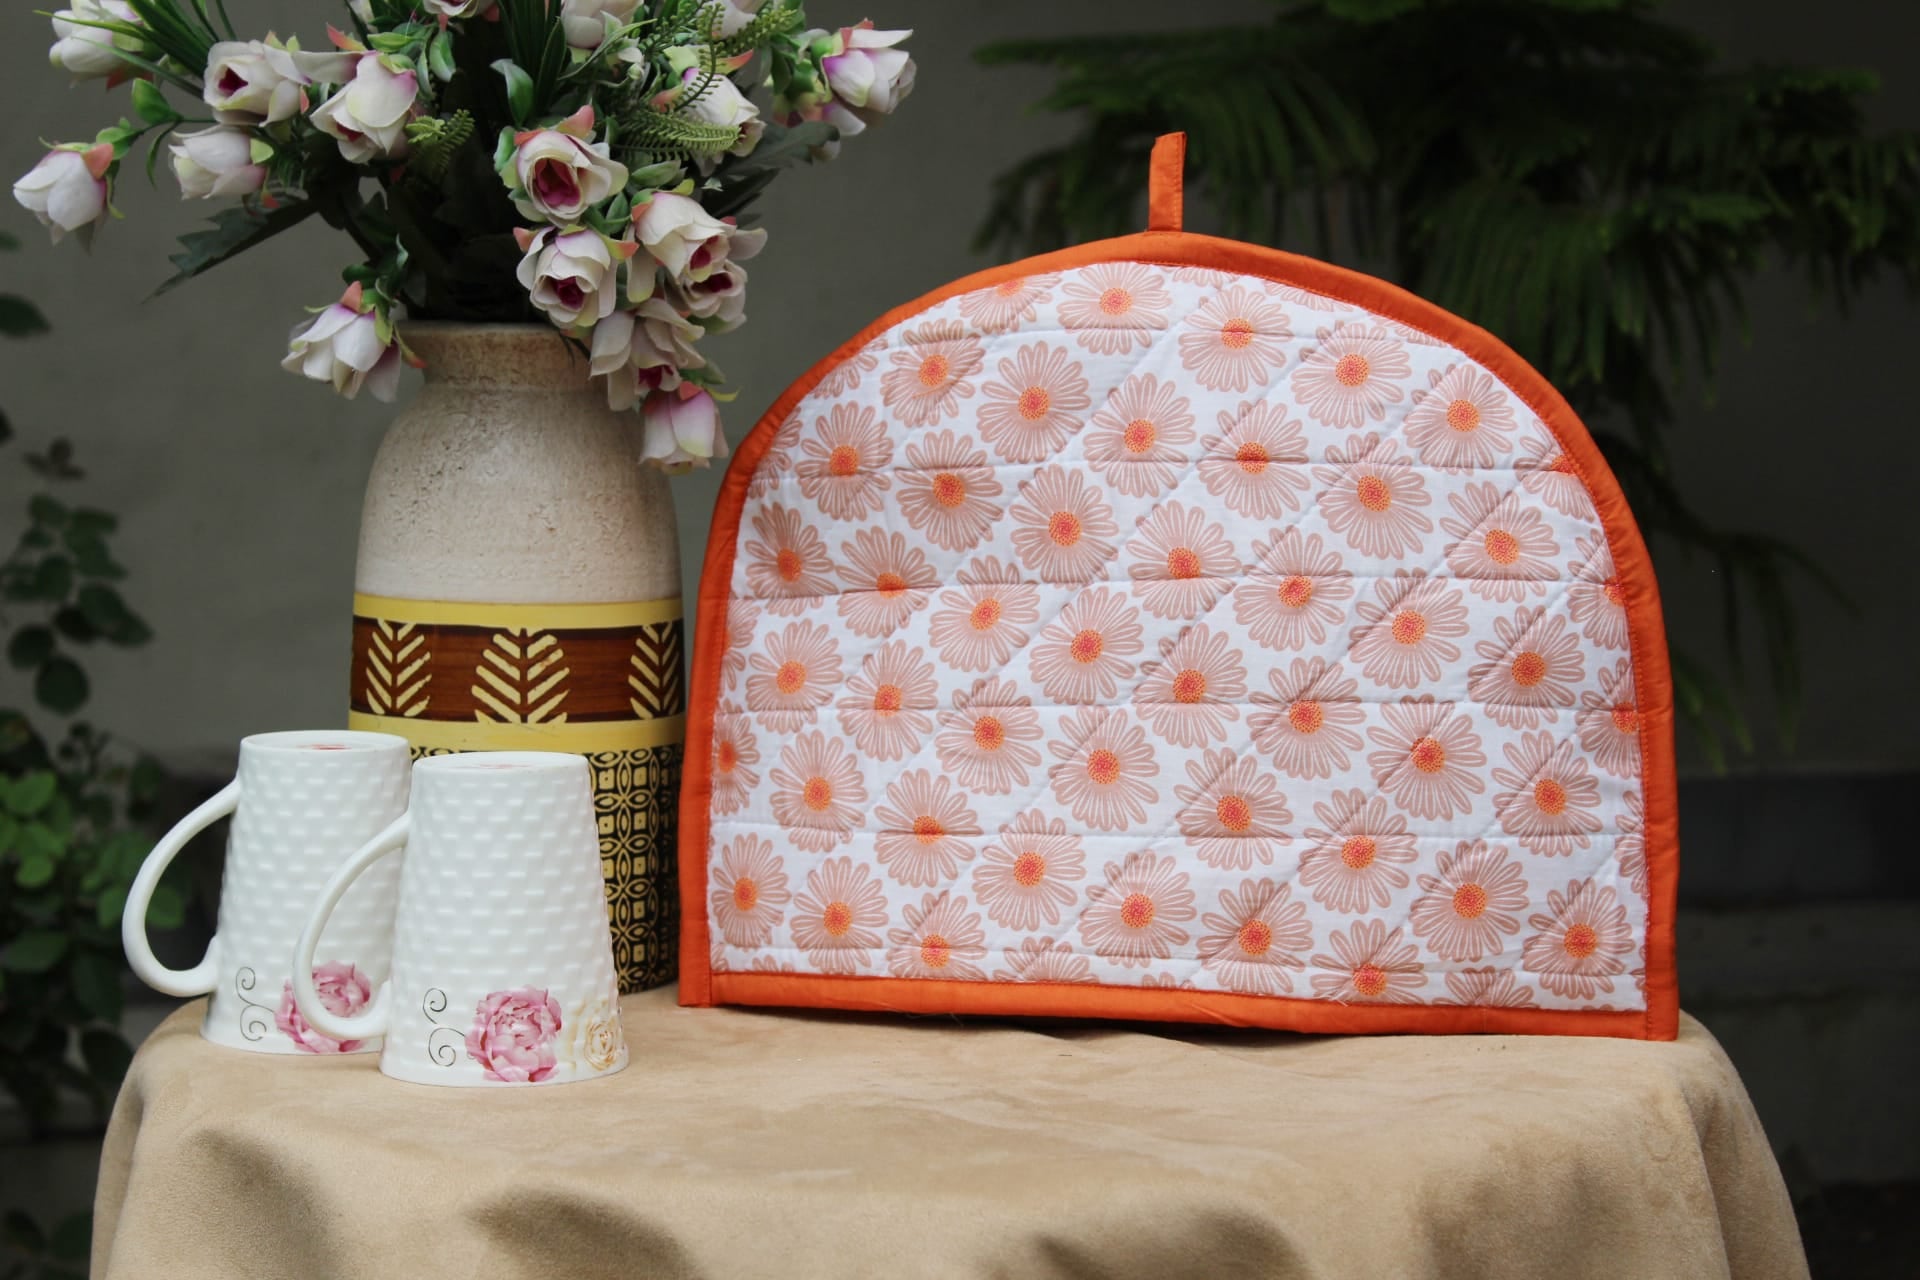 Stylish Printed Cotton Quilted Tea Cozy online in India at best prices